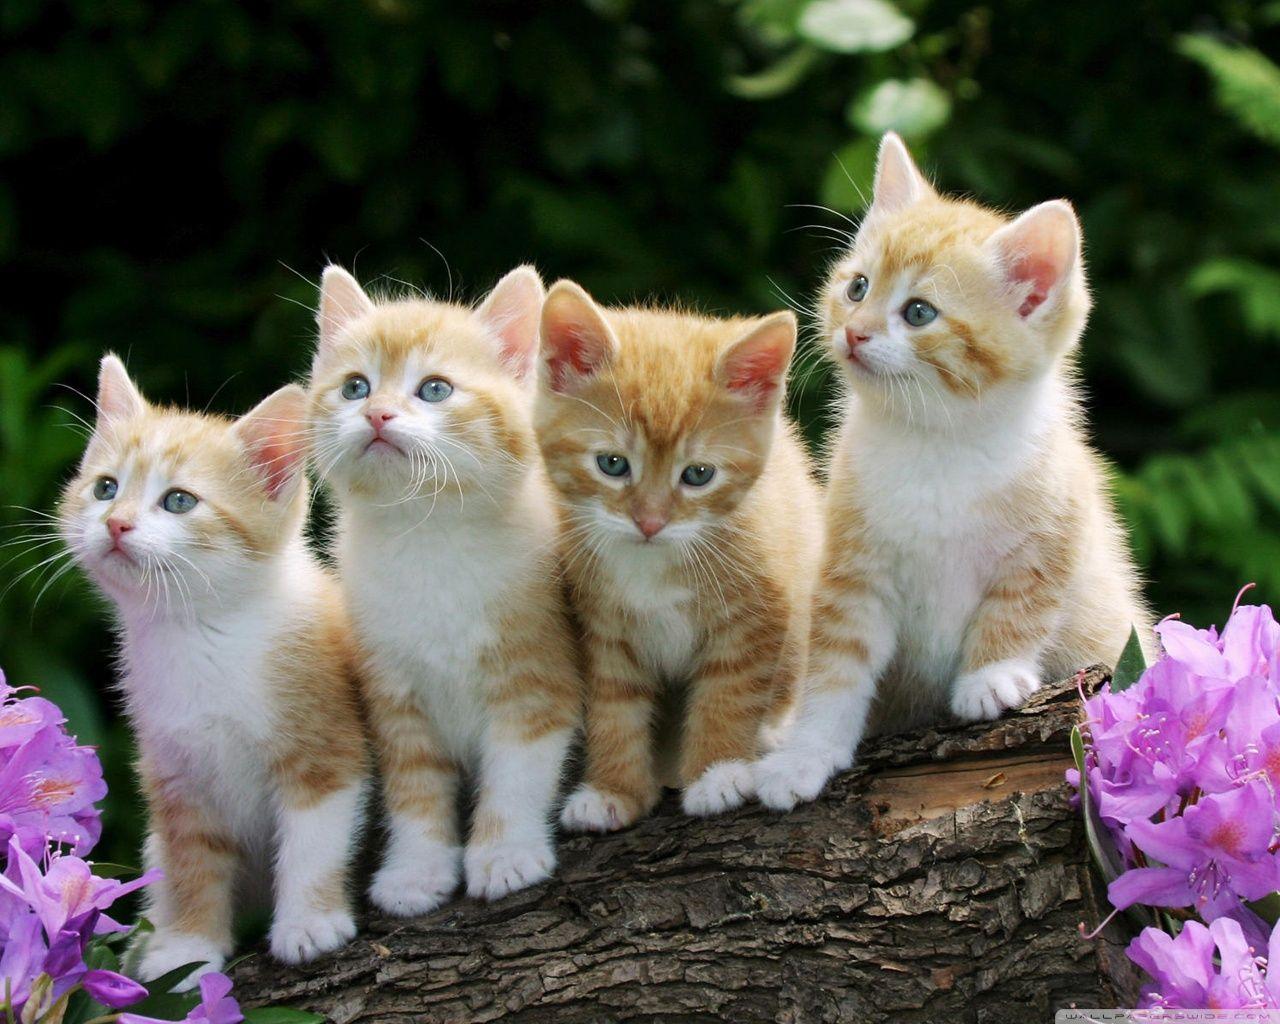 Cats and Kittens Wallpapers - Top Free